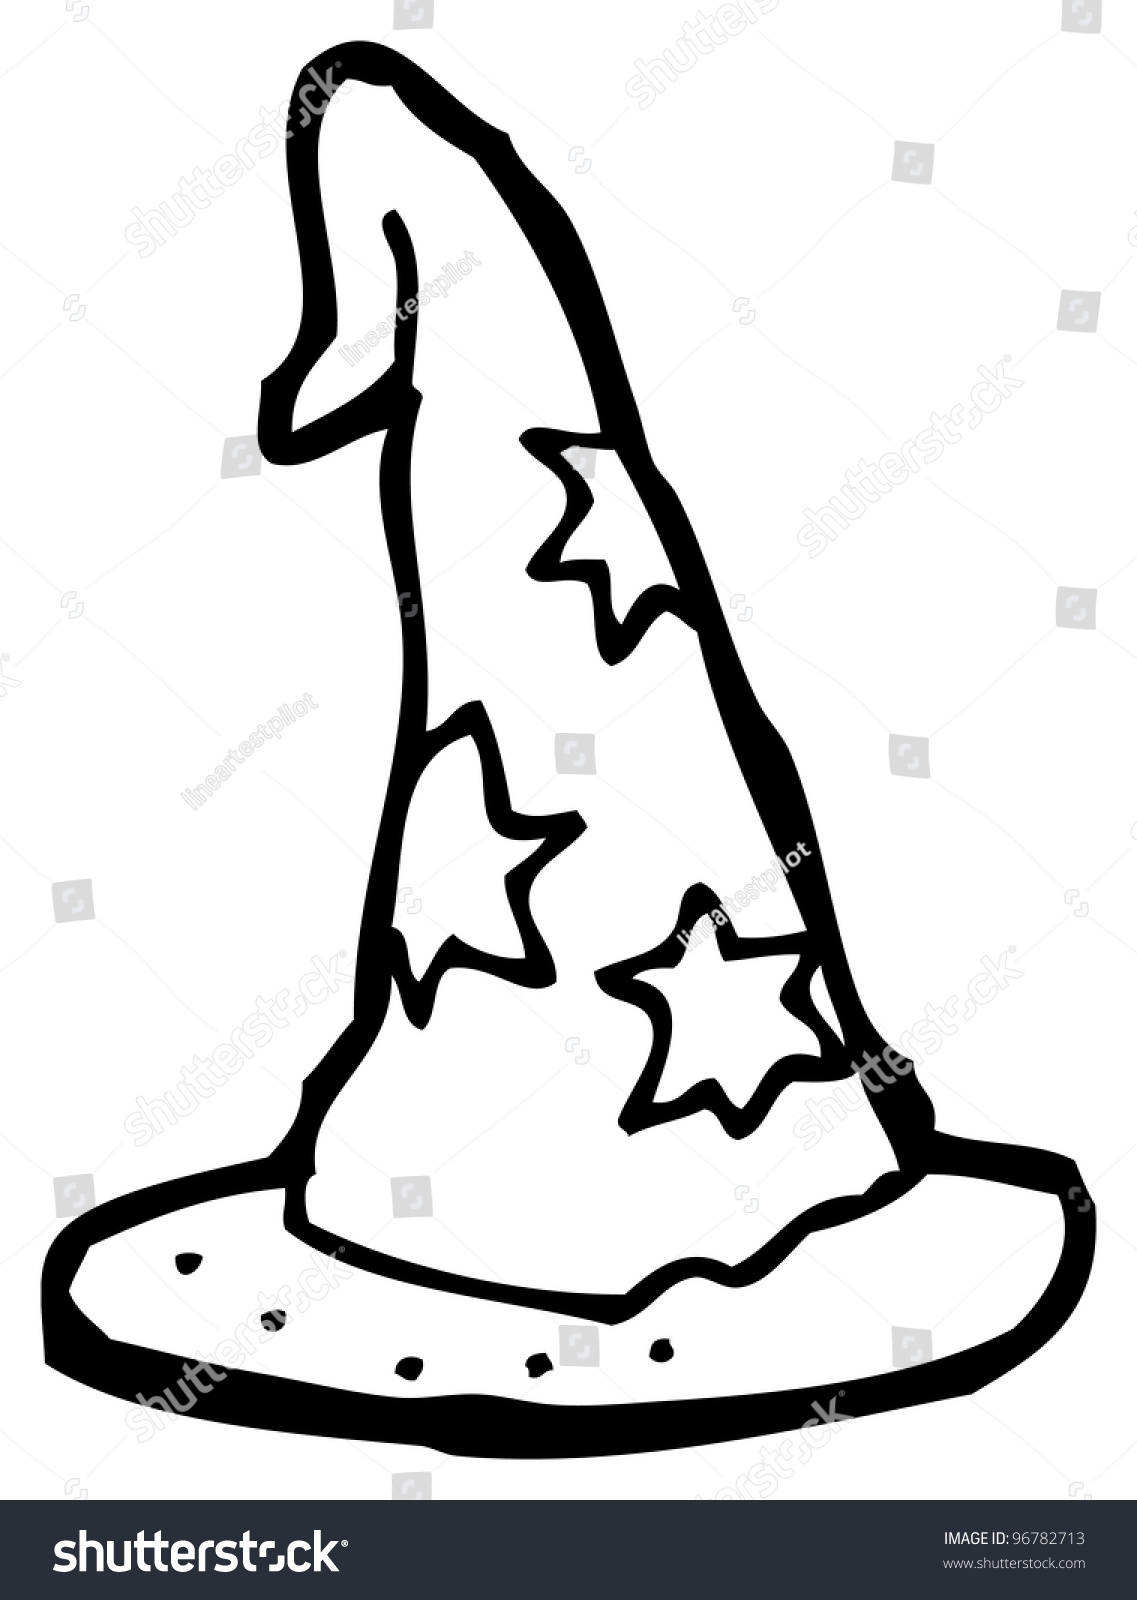 clipart wizard hat - photo #43